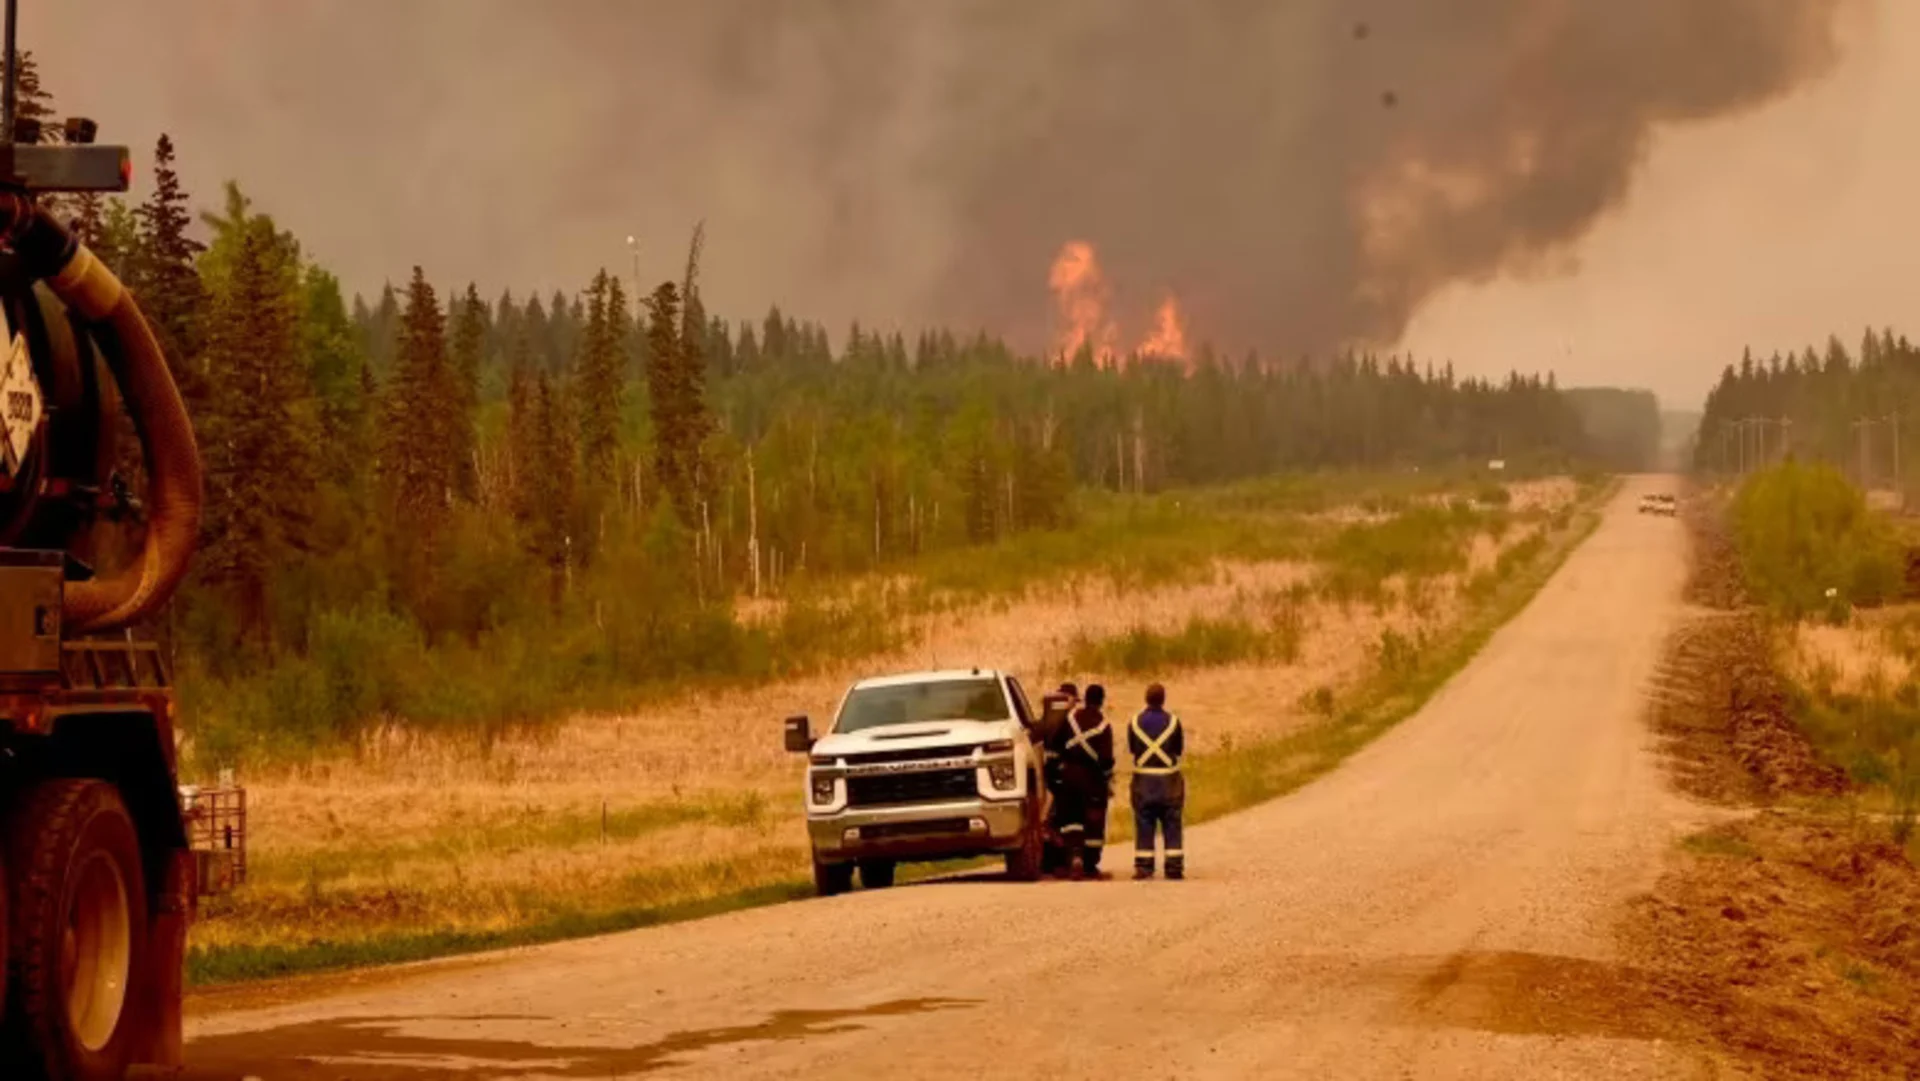 Alberta's fight against wildfires could drag on all summer, official says